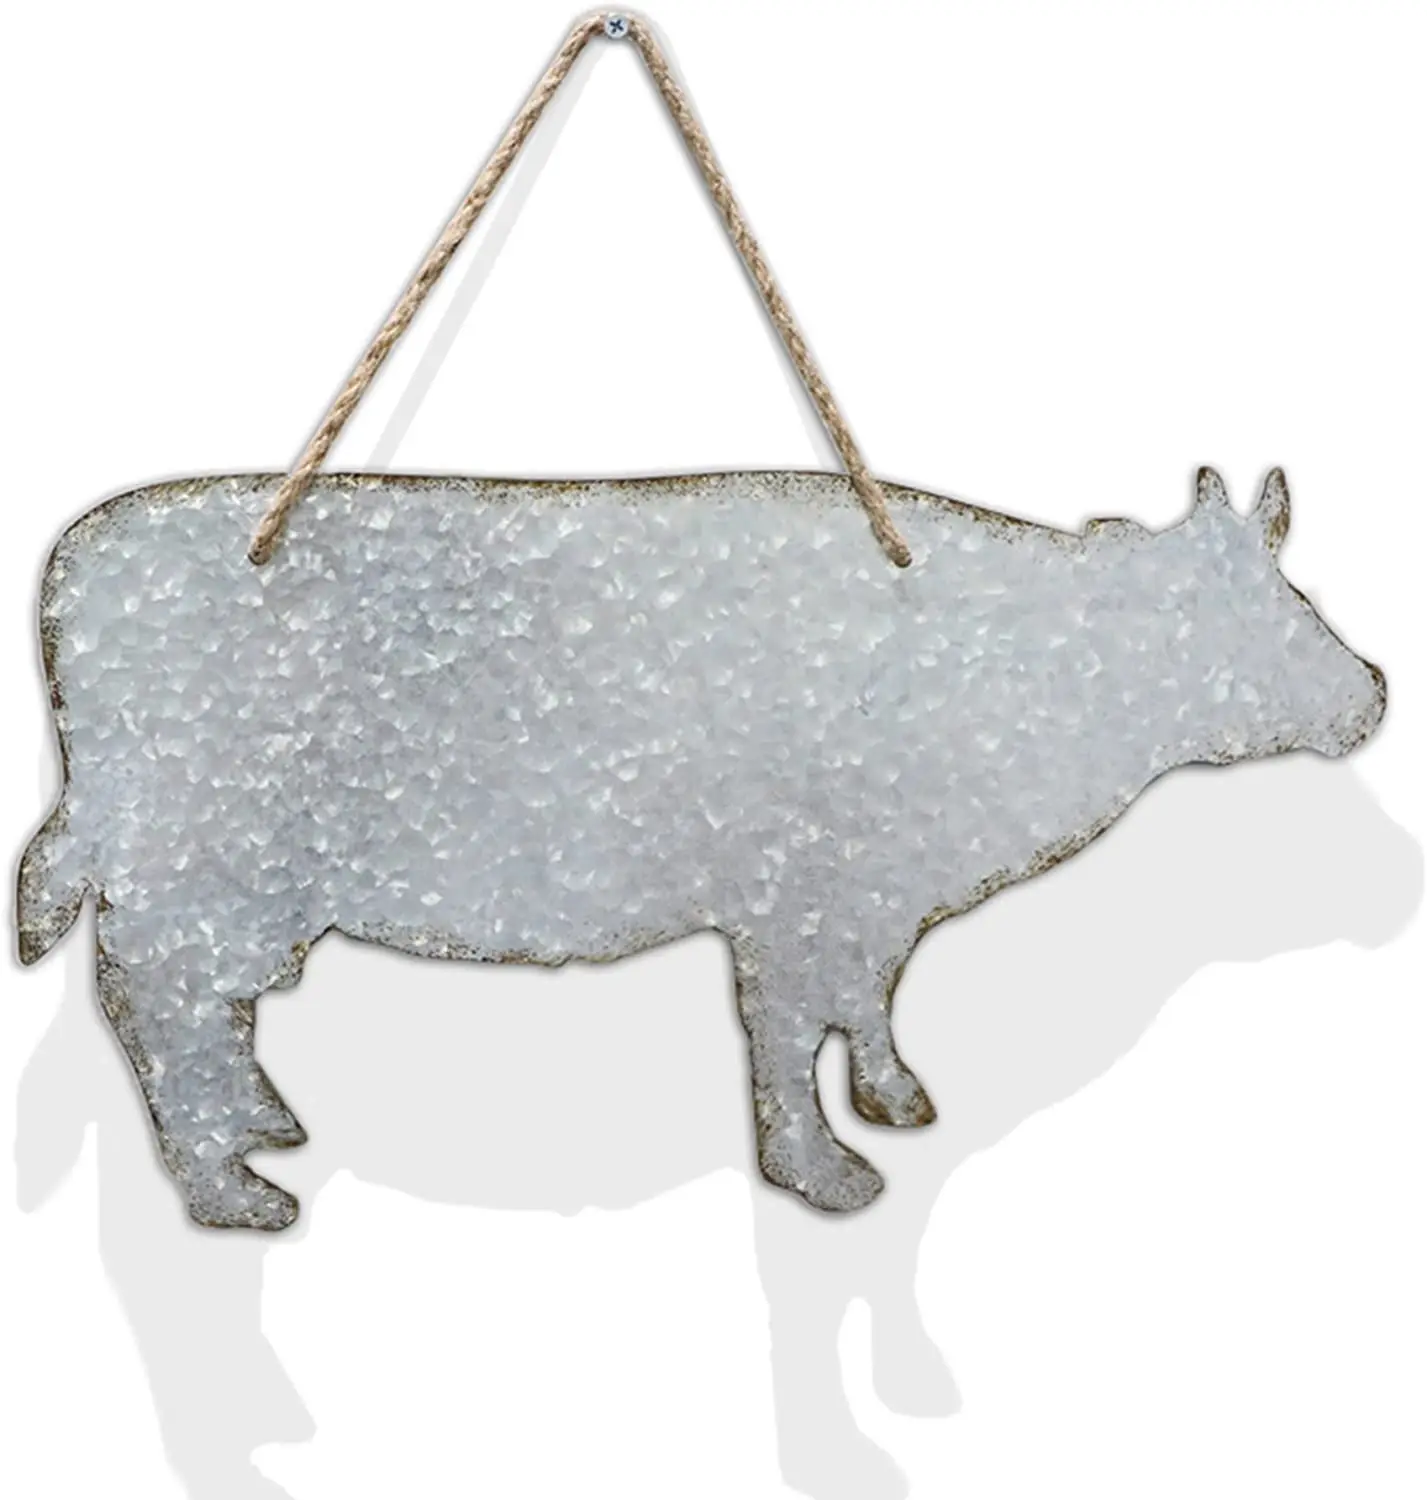 Galvanized Cow Farm Animal Cut Out Silhouette Rustic Wall Decor - Buy  Decorative Galvanized,Galvanized Cow Farm Animal,Cut Out Silhouette Rustic  Wall Decor Product on 